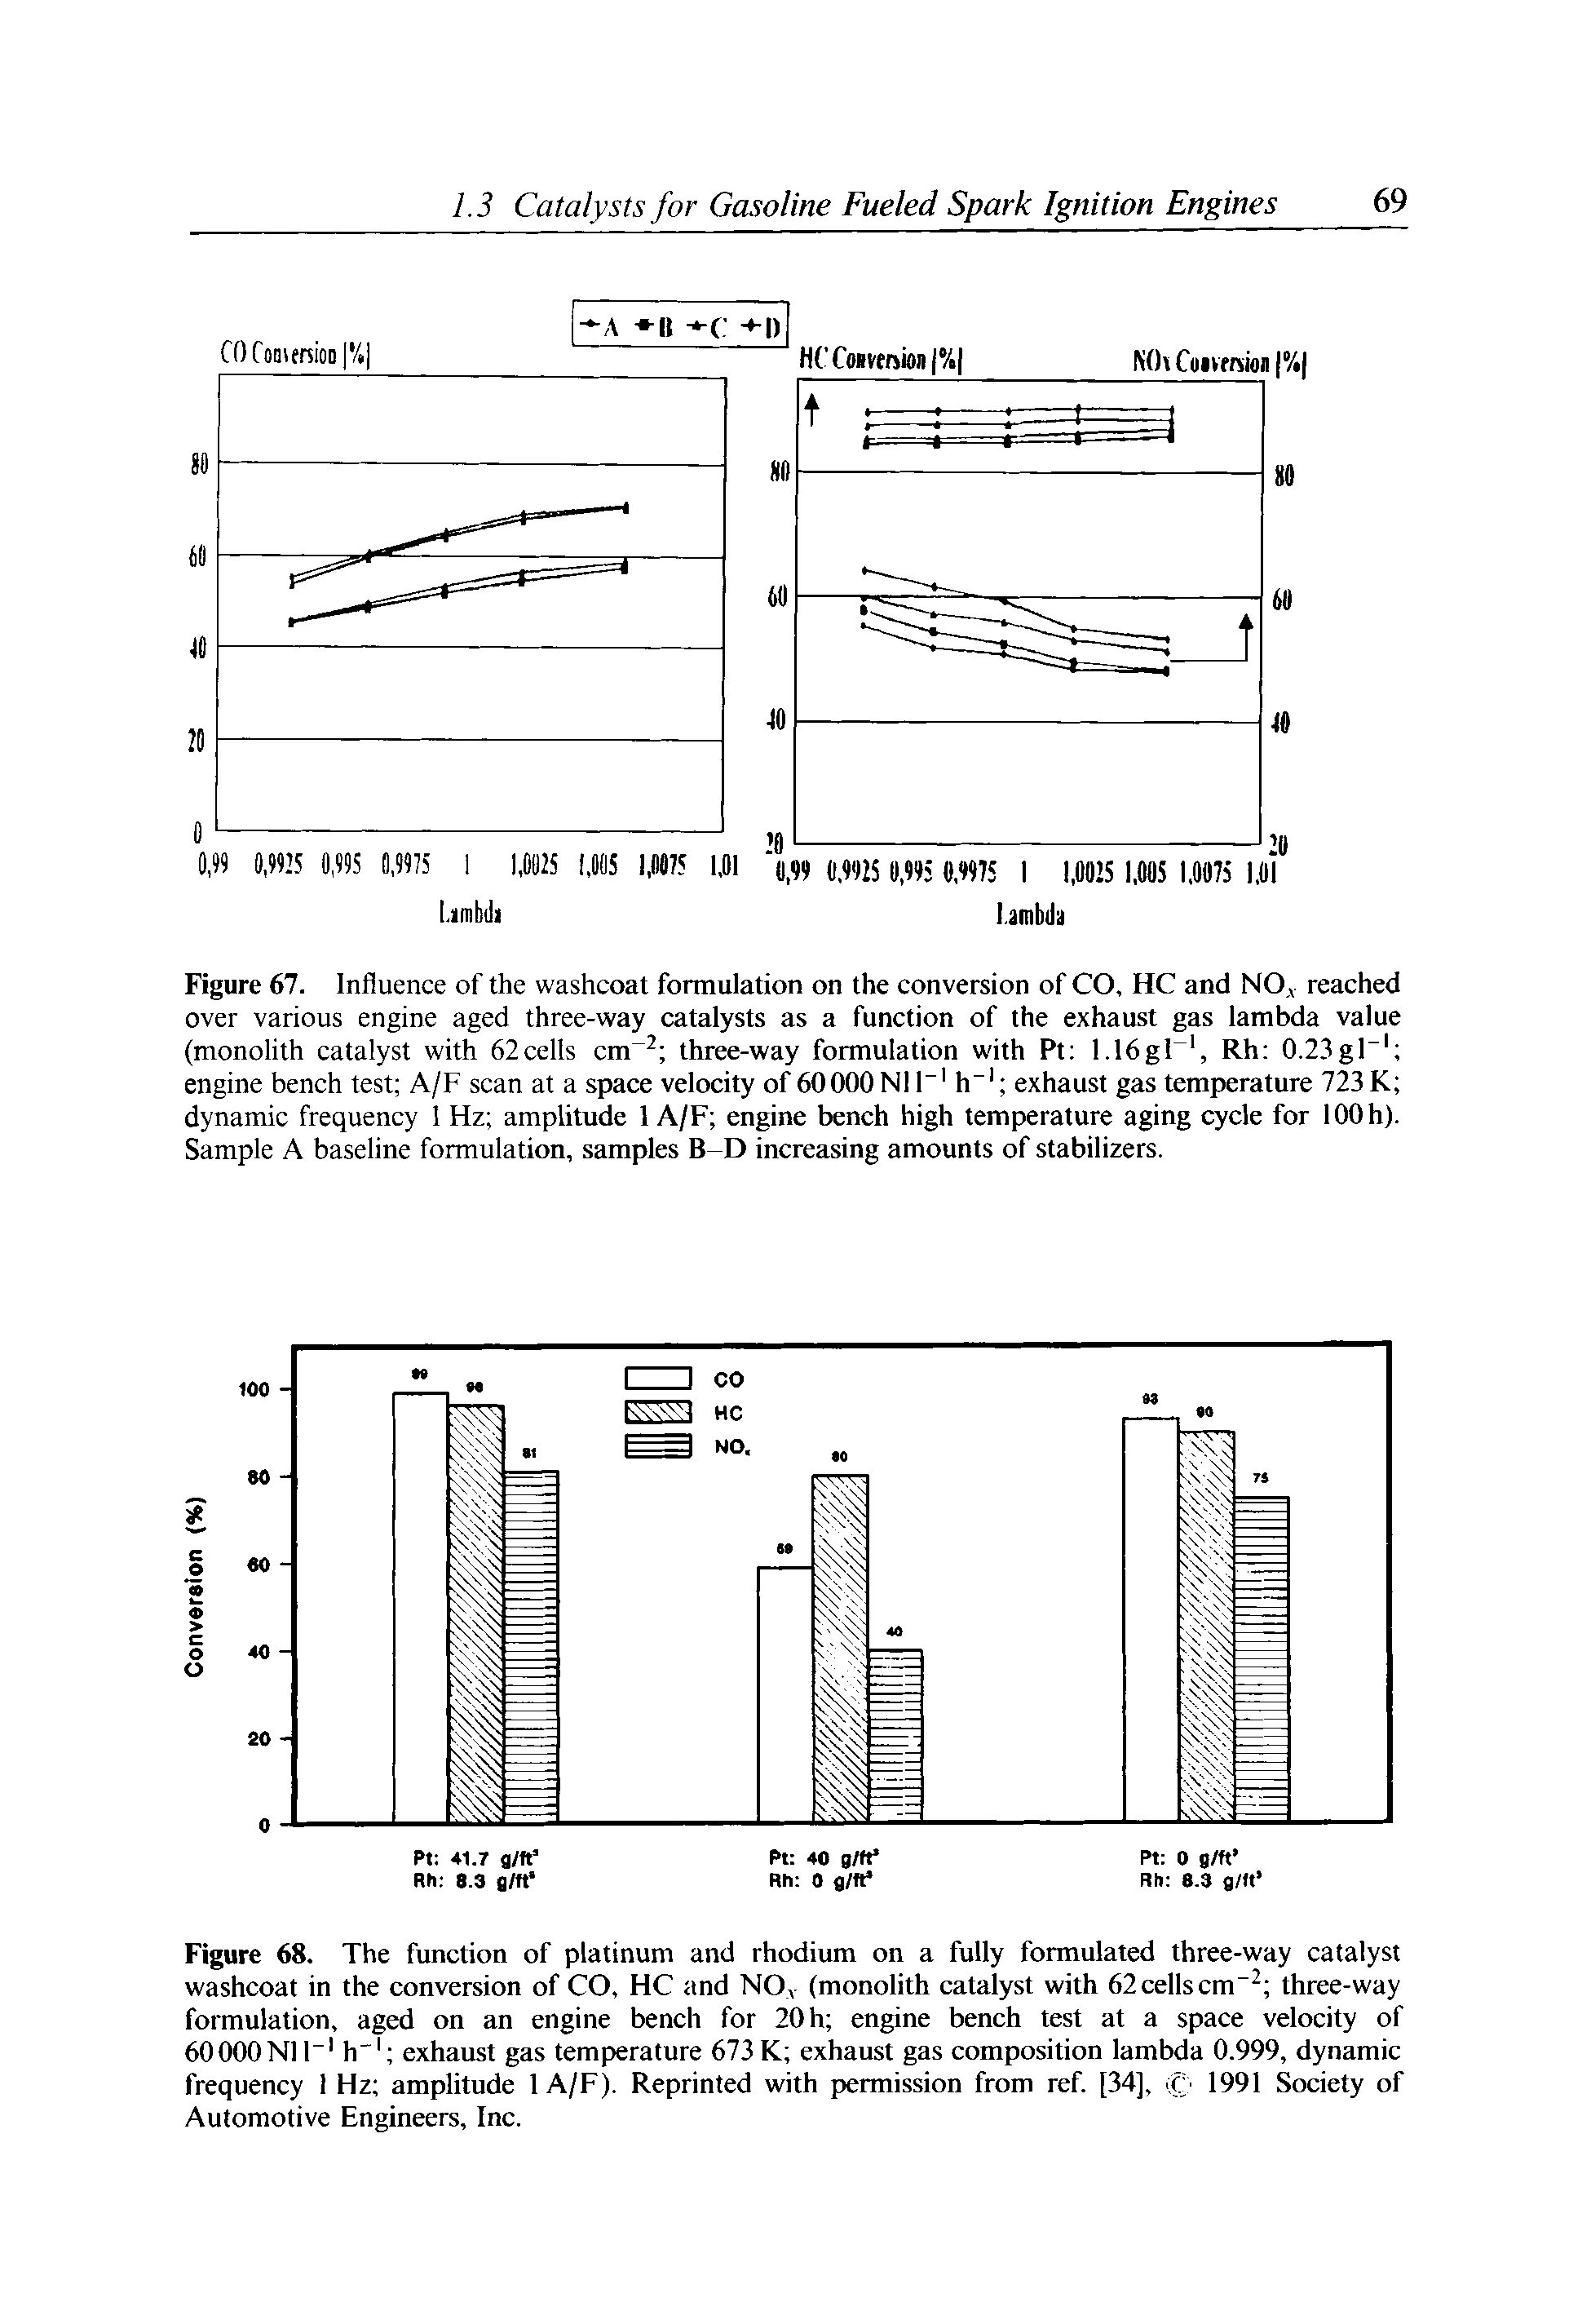 Figure 67. Influence of the washcoat formulation on the conversion of CO, HC and NO , reached over various engine aged three-way catalysts as a function of the exhaust gas lambda value (monolith catalyst with 62cells cm three-way formulation with Pt 1.16gC, Rh 0.23gl" engine bench test A/F scan at a space velocity of 60000 Nl 1 h exhaust gas temperature 723 K dynamic frequency 1 Hz amplitude 1 A/F engine bench high temperature aging cycle for lOOh). Sample A baseline formulation, samples B-D increasing amounts of stabilizers.